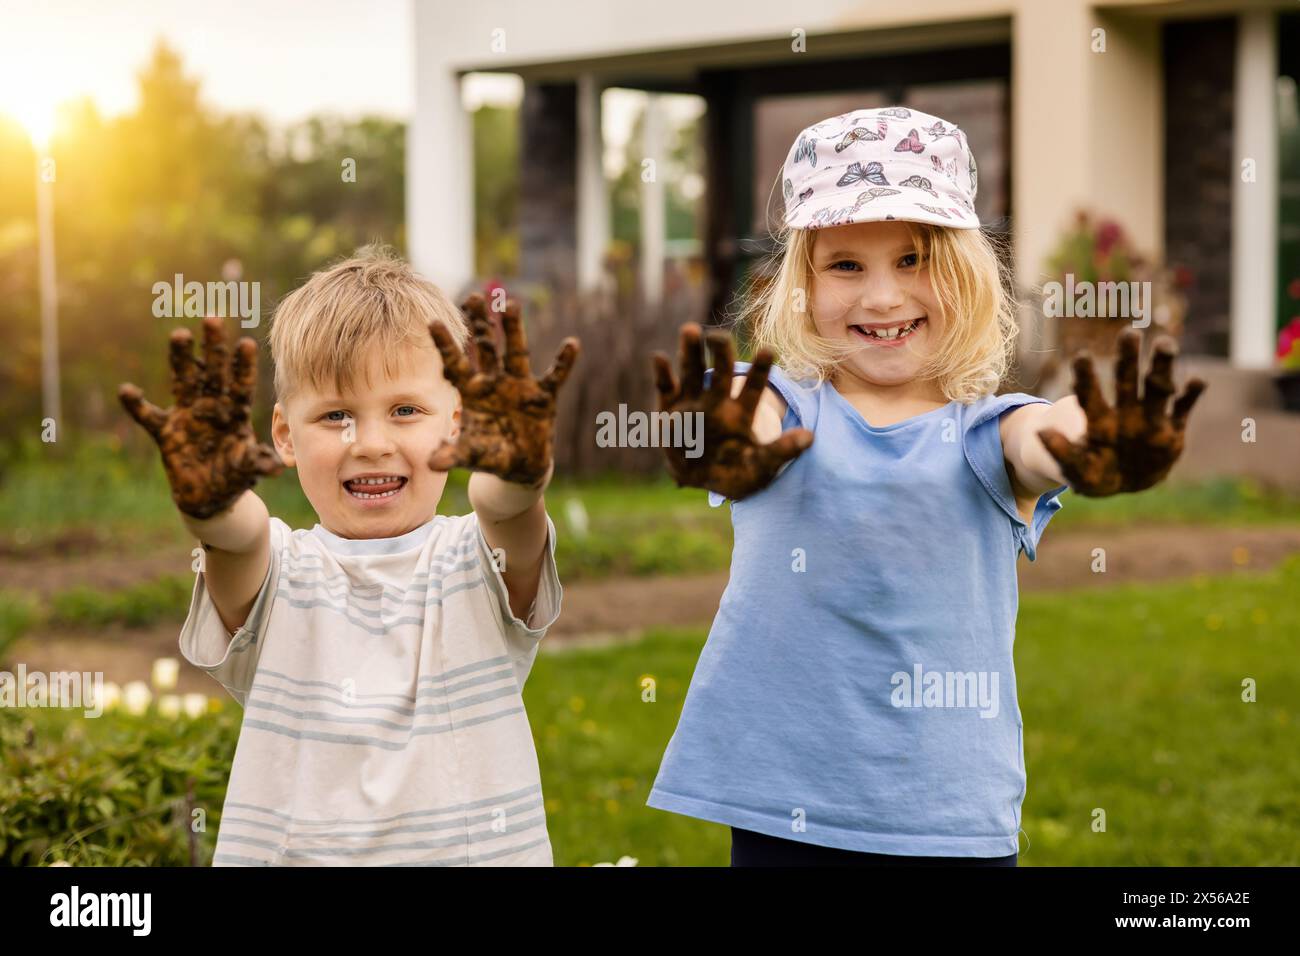 cheerful kids showing dirty muddy hands outdoors in garden Stock Photo